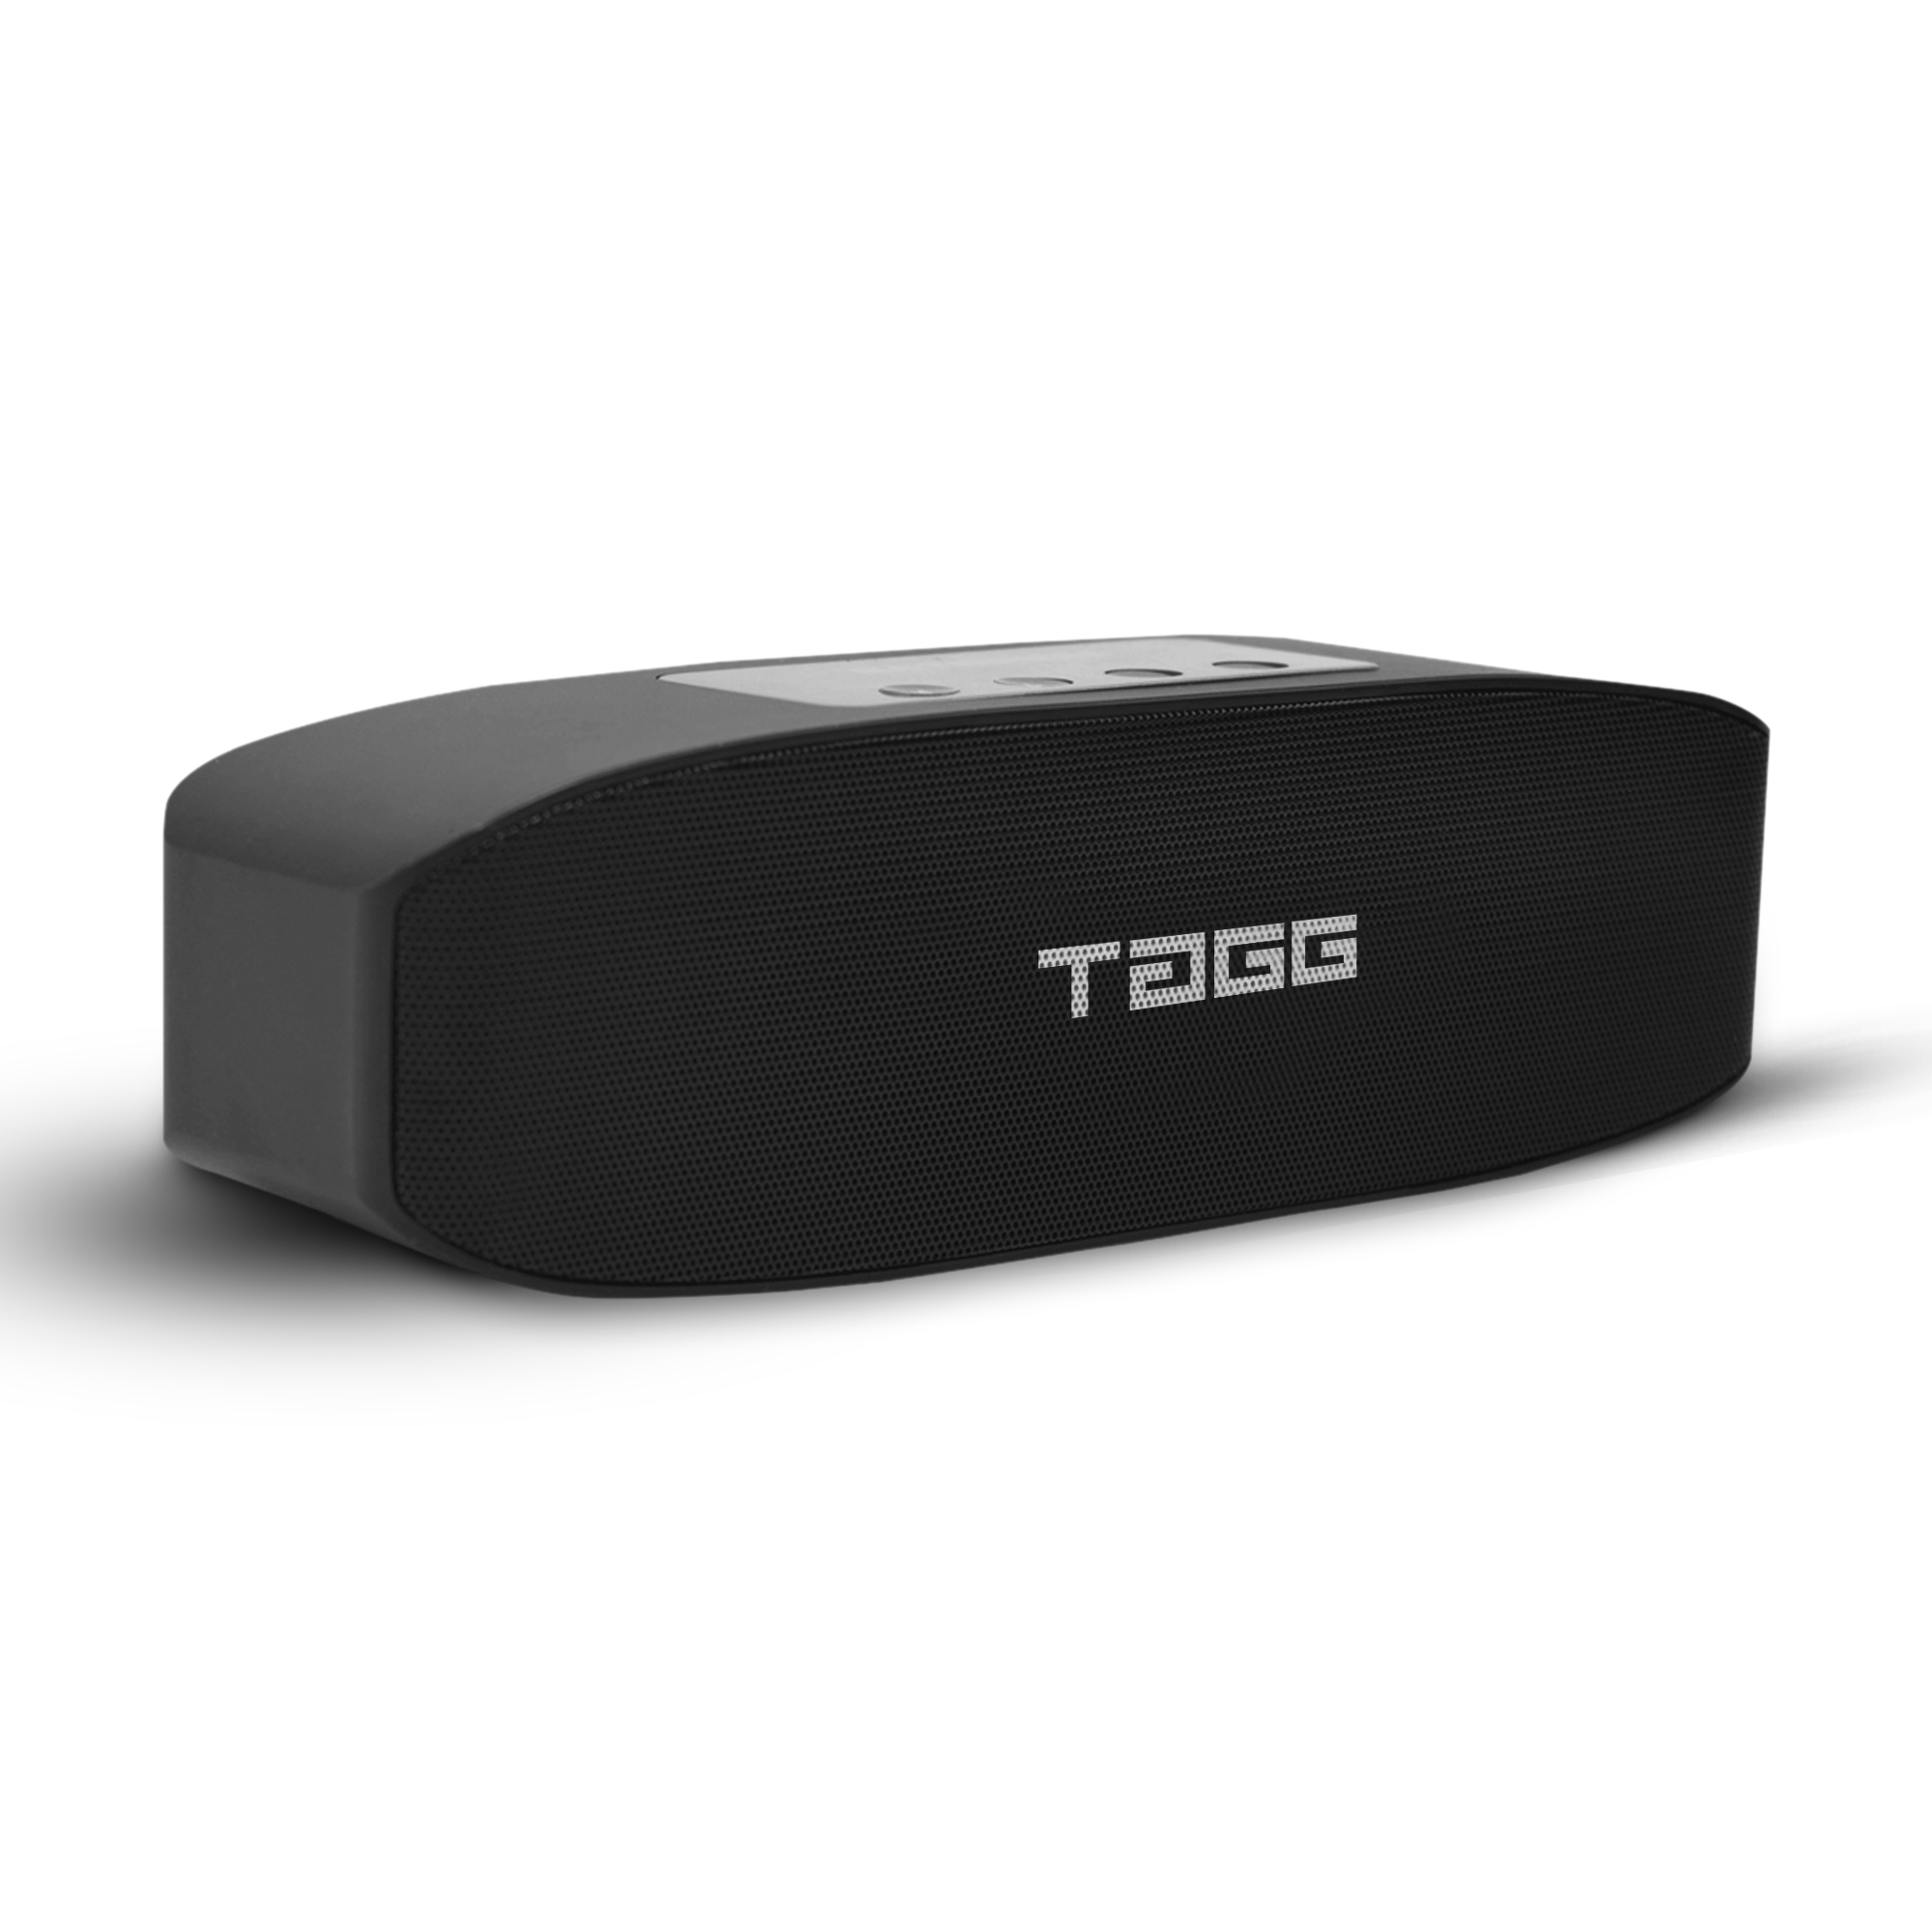 TAGG introduces it first Bluetooth enabled speakers-LOOP